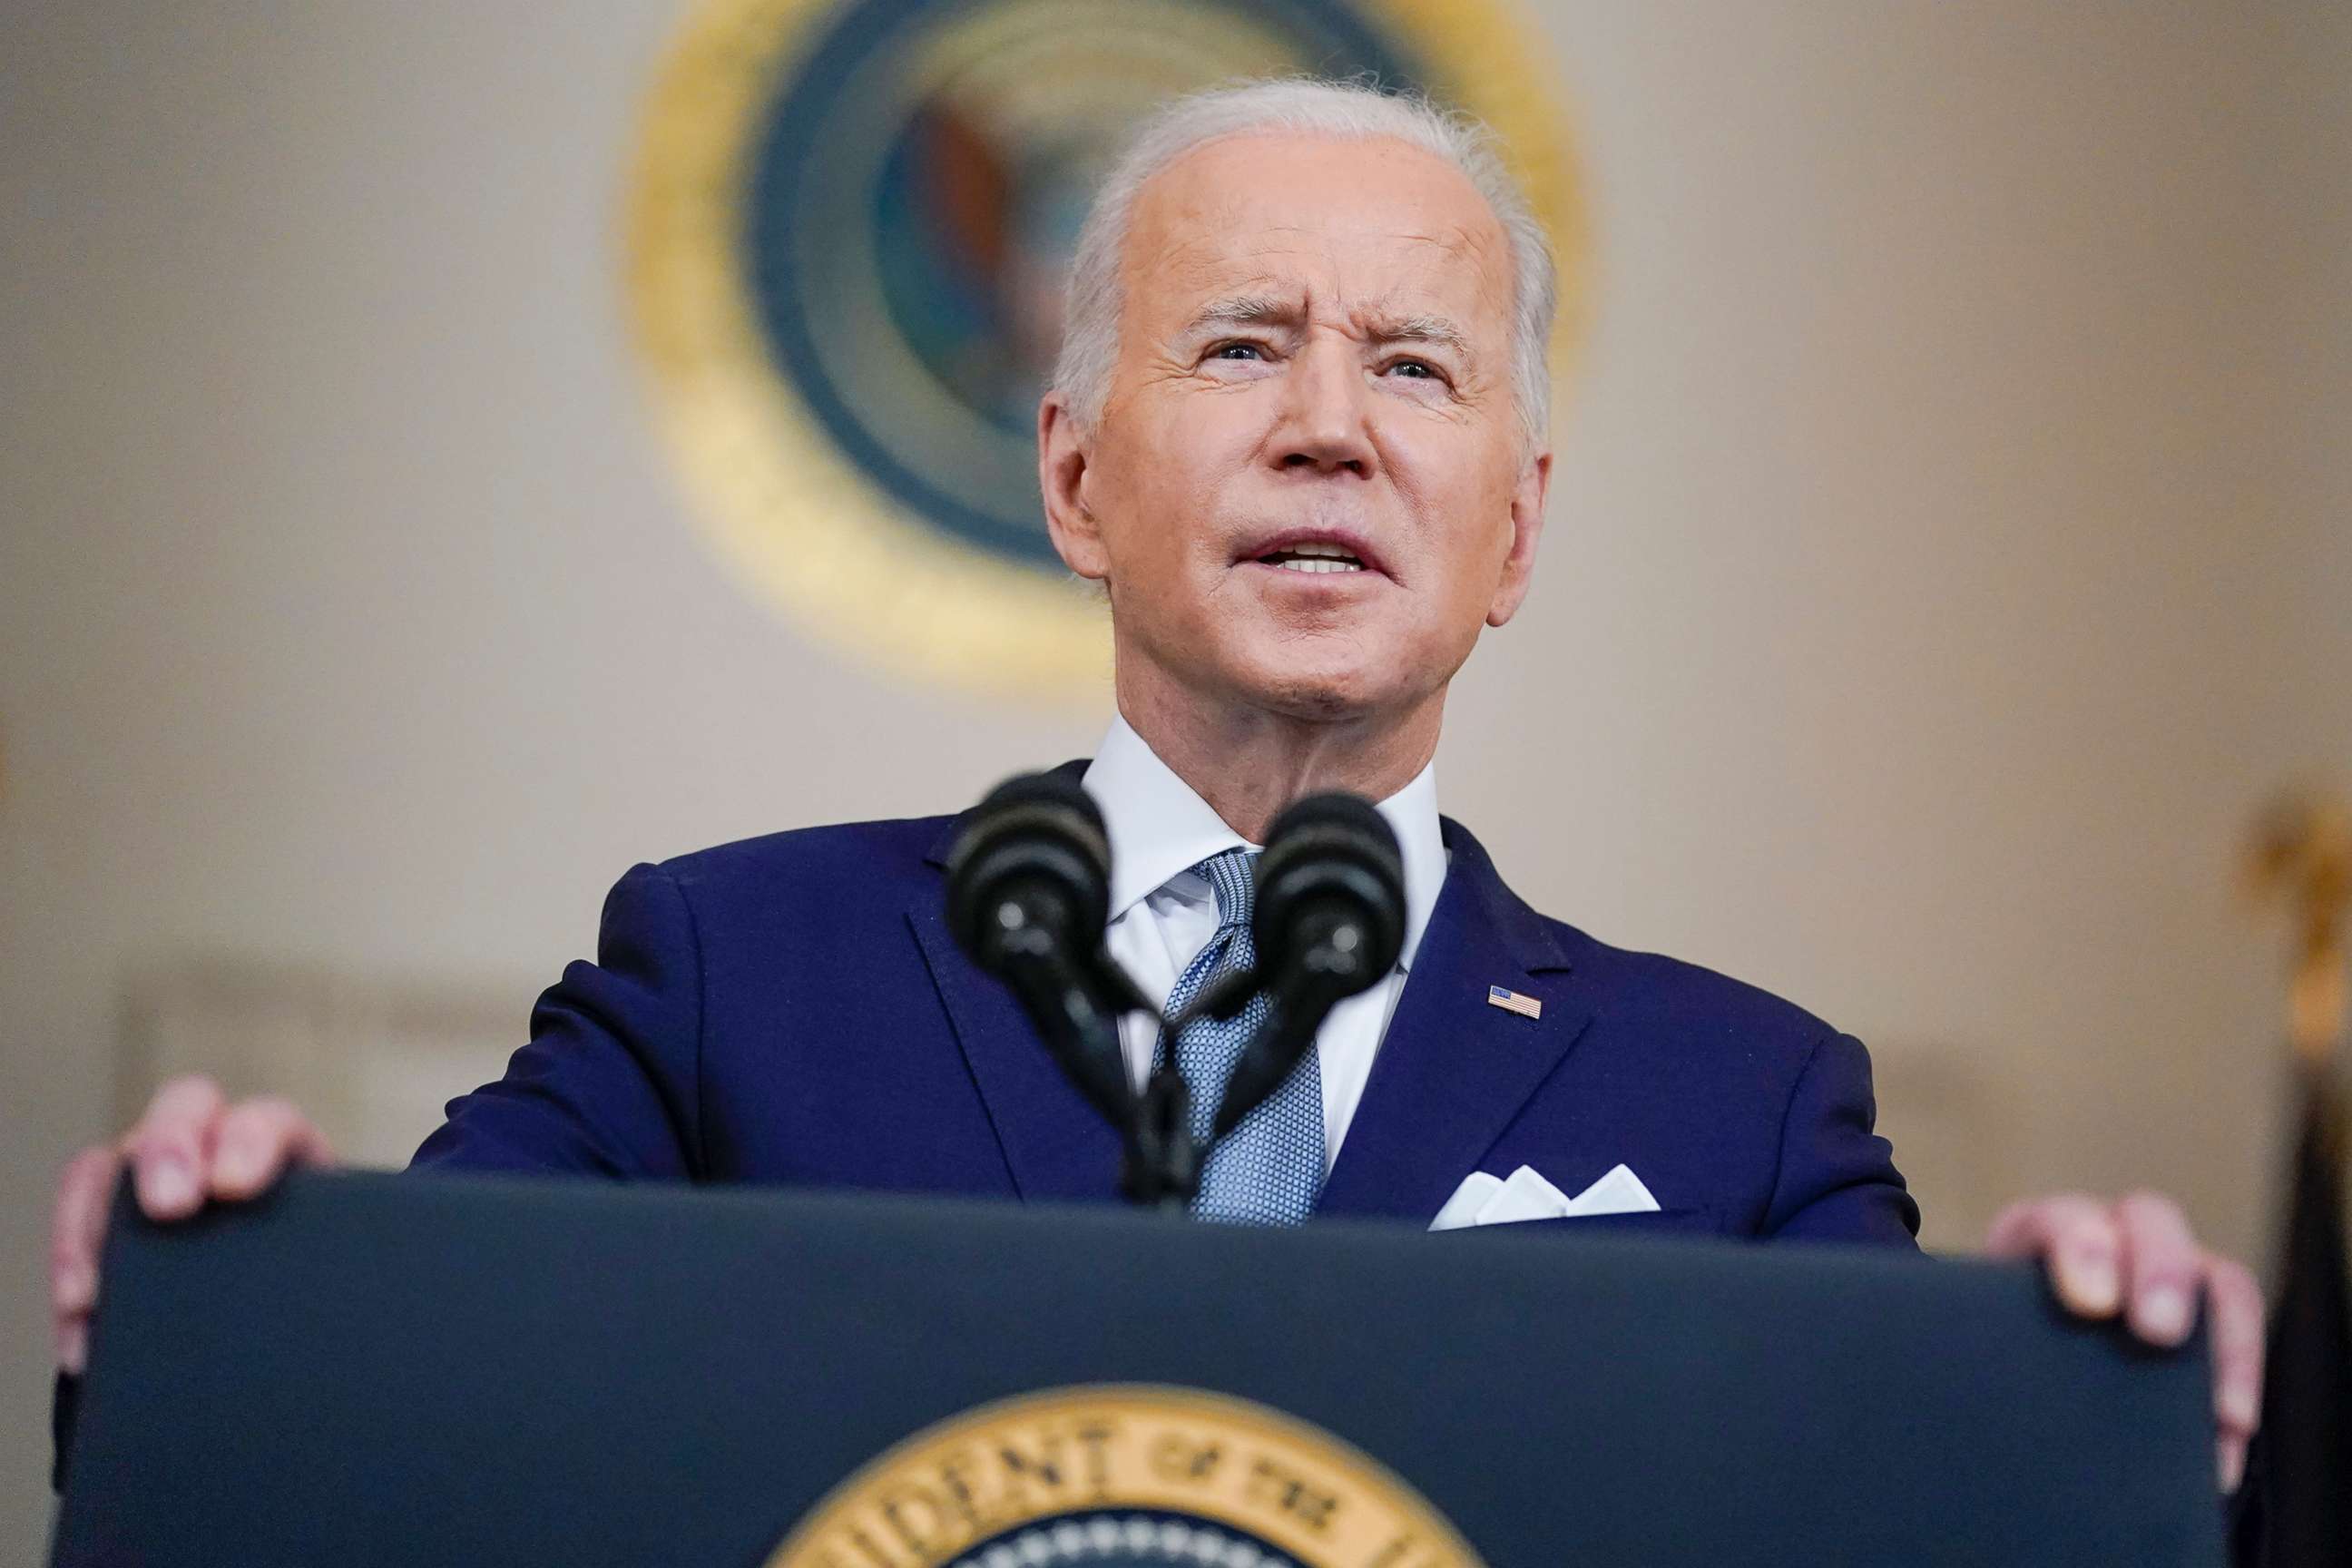 PHOTO: President Joe Biden speaks as he announces Judge Ketanji Brown Jackson as his nominee to the Supreme Court in the Cross Hall of the White House, Feb. 25, 2022.